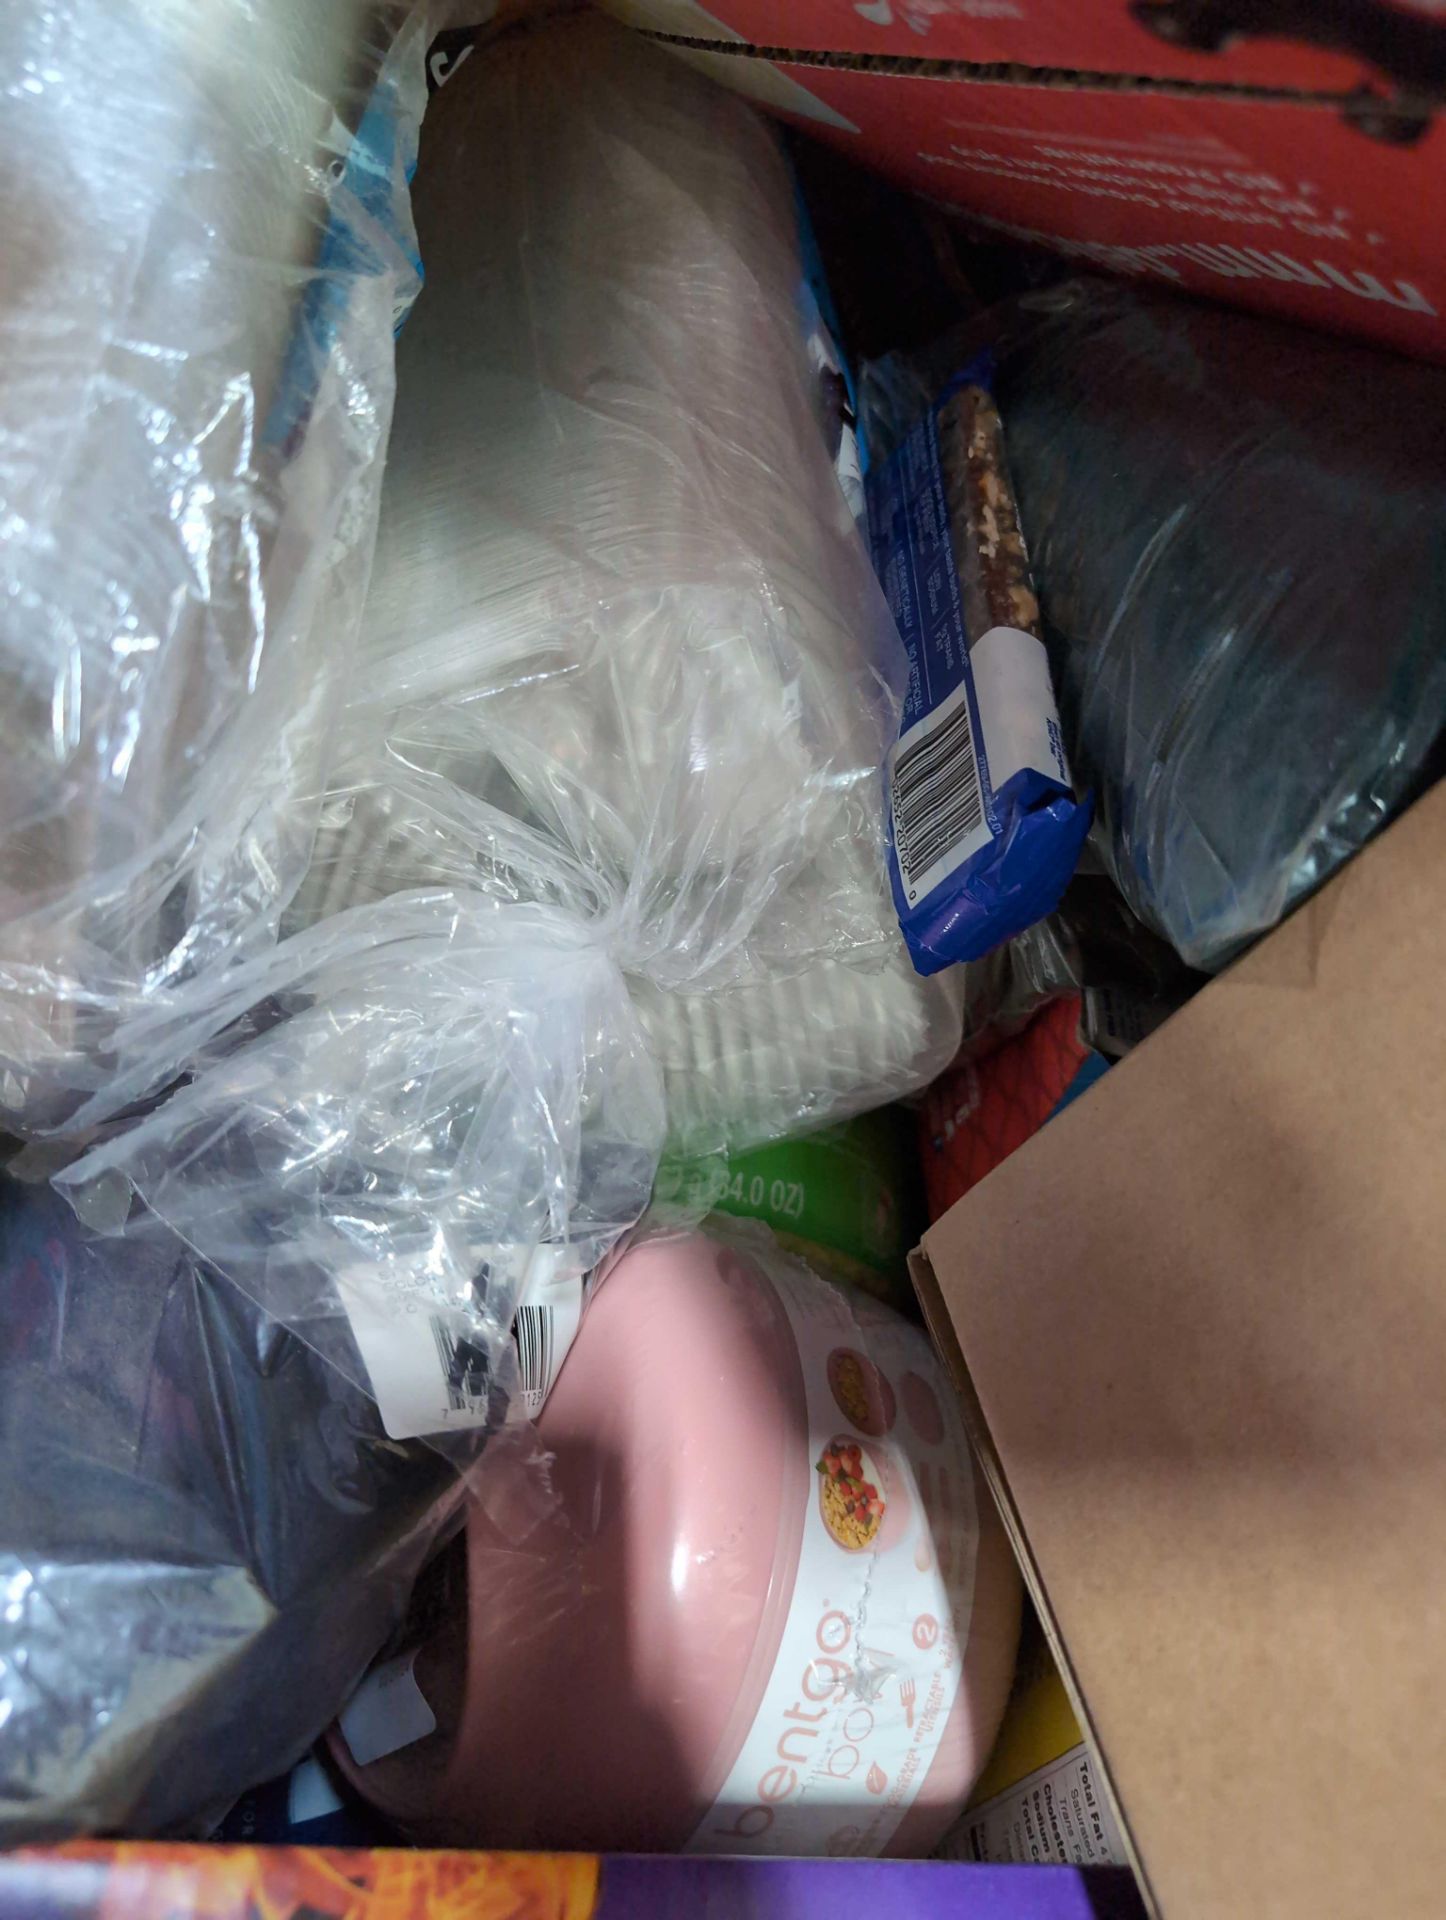 Big box store in box: viking bowls, takis, pudding, country time lemonade, quest chips, popcorn, cut - Image 14 of 16